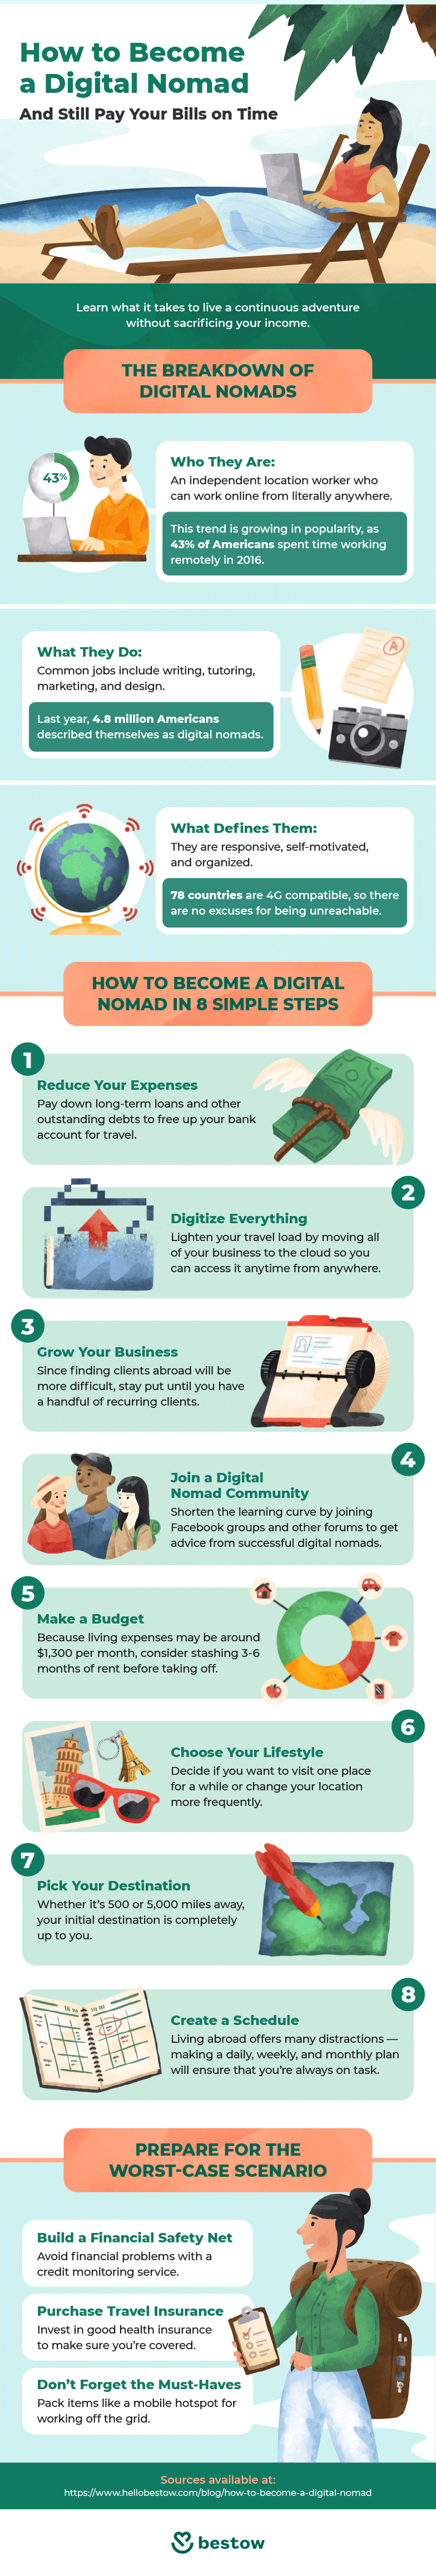 Infographic: What Are Digital Nomads and How Can you Become One?